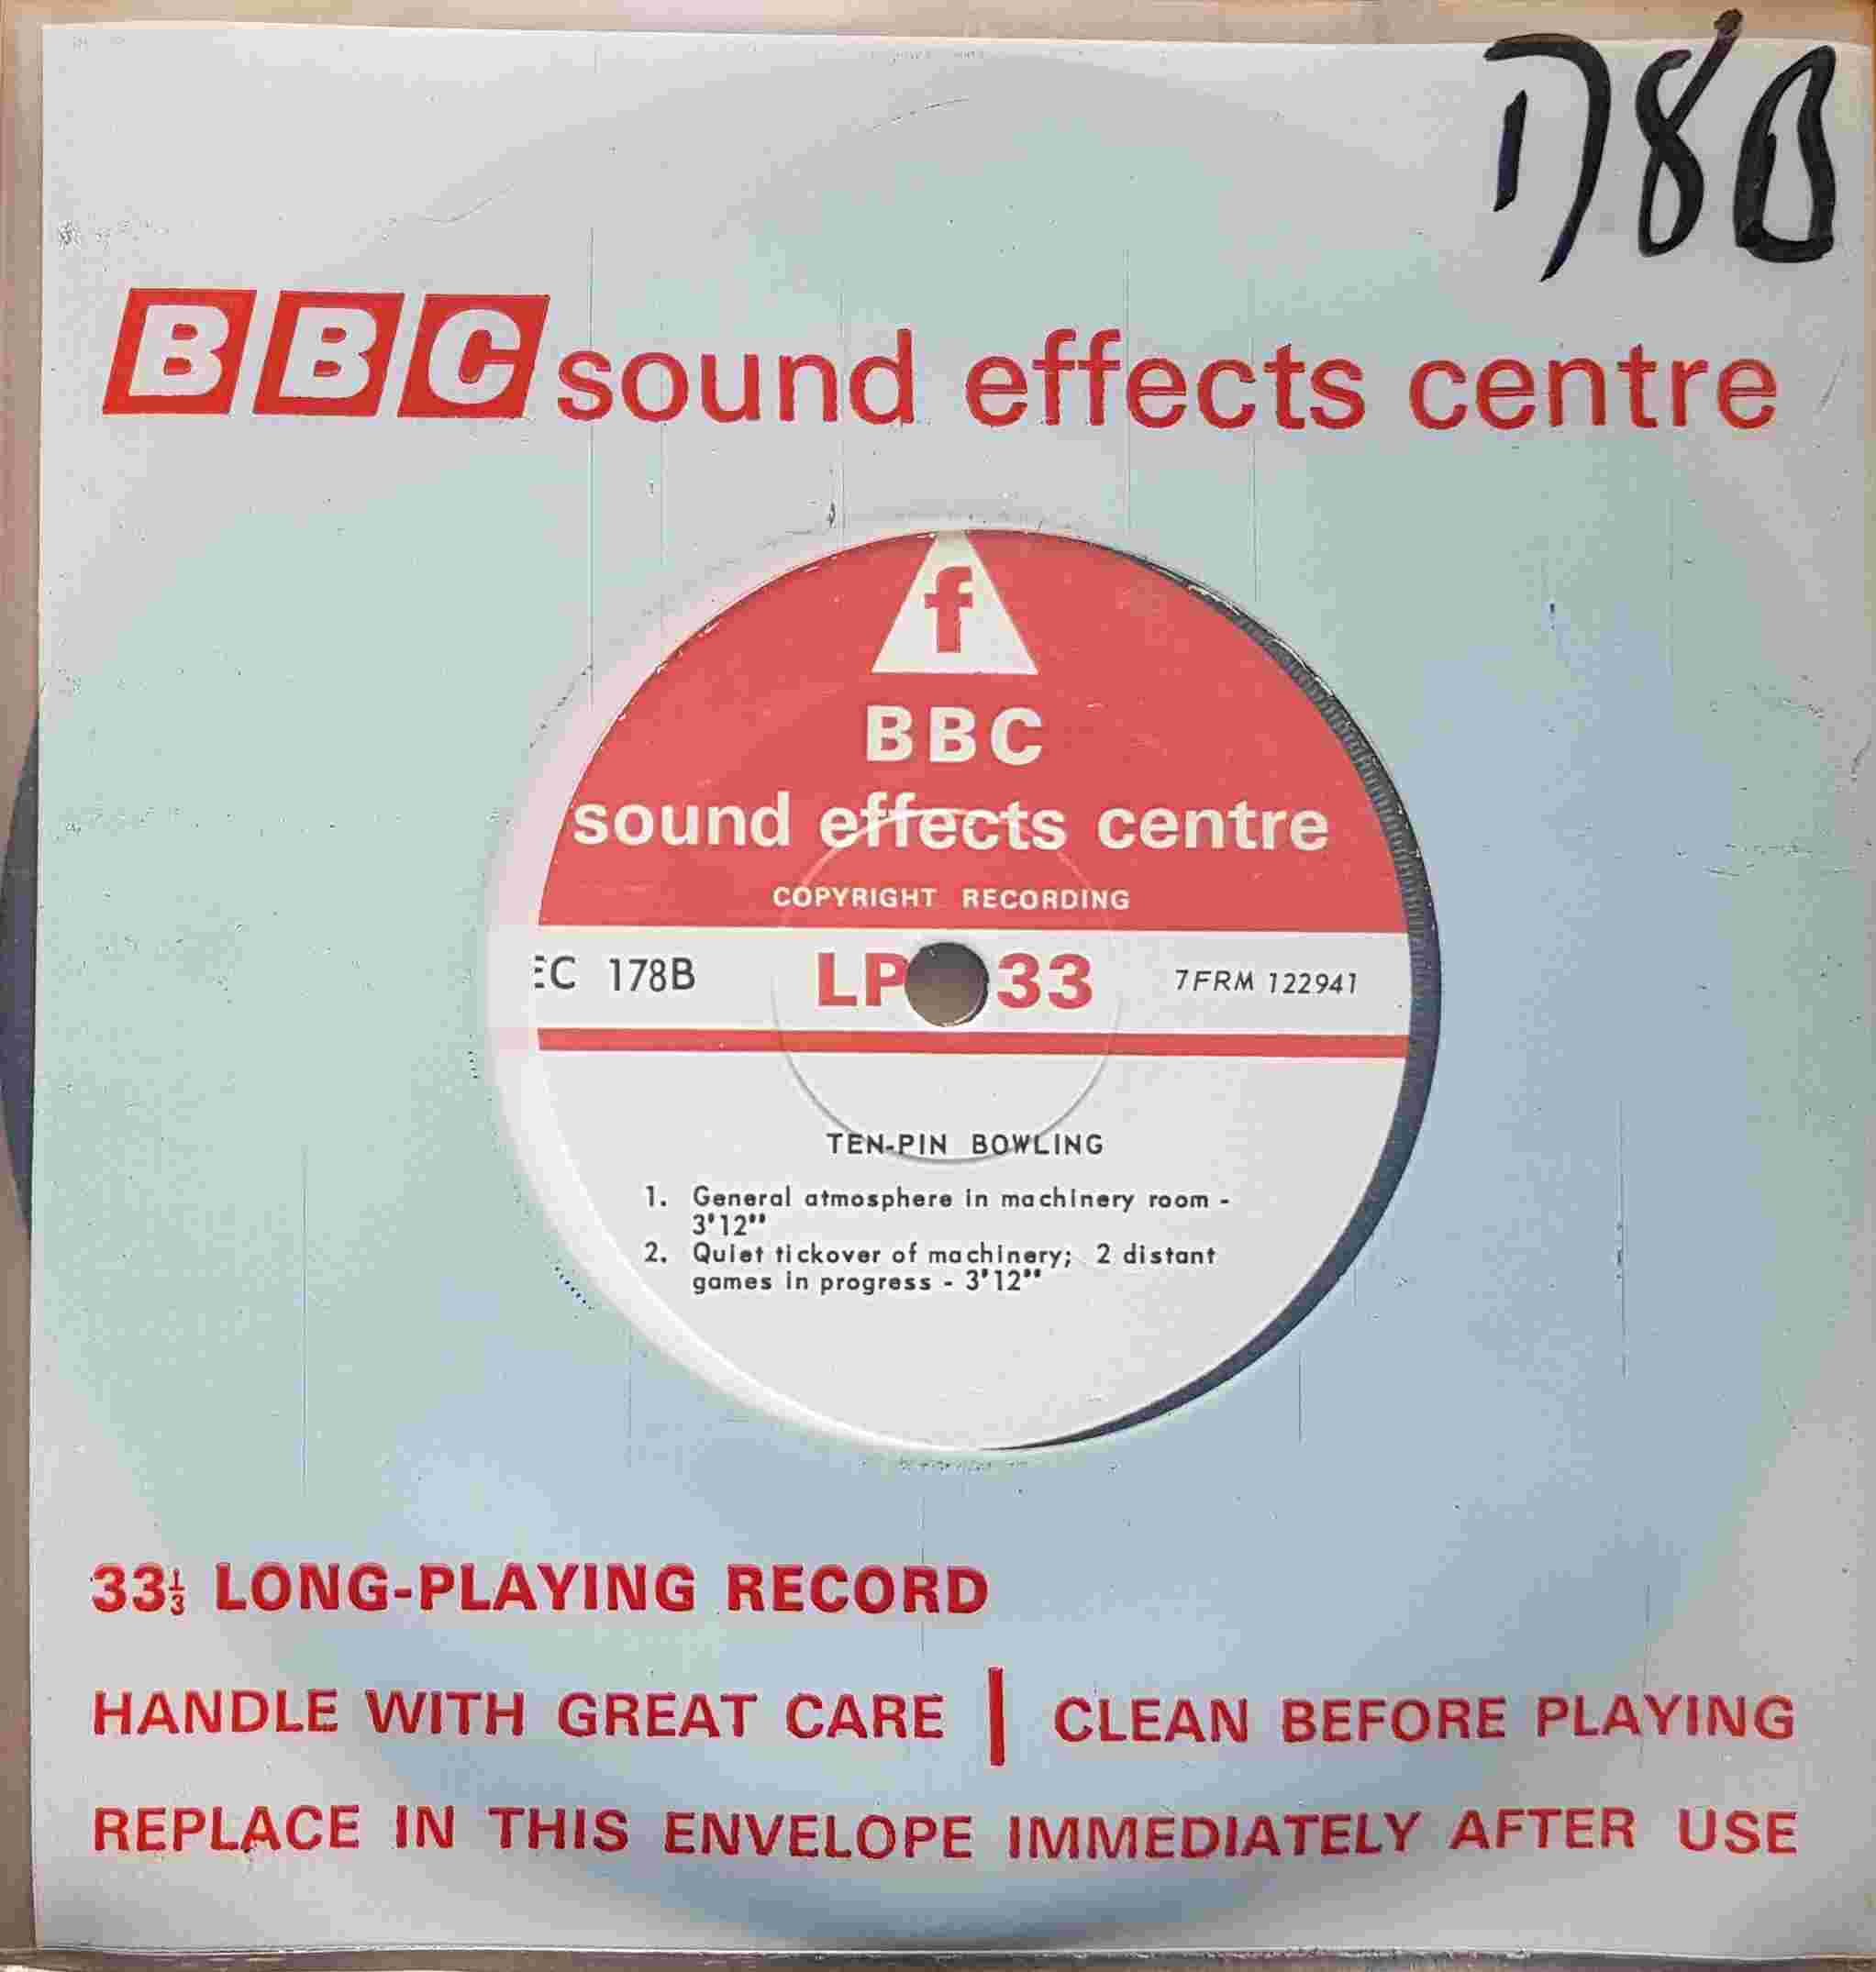 Picture of EC 178B Ten-pin bowling by artist Not registered from the BBC singles - Records and Tapes library